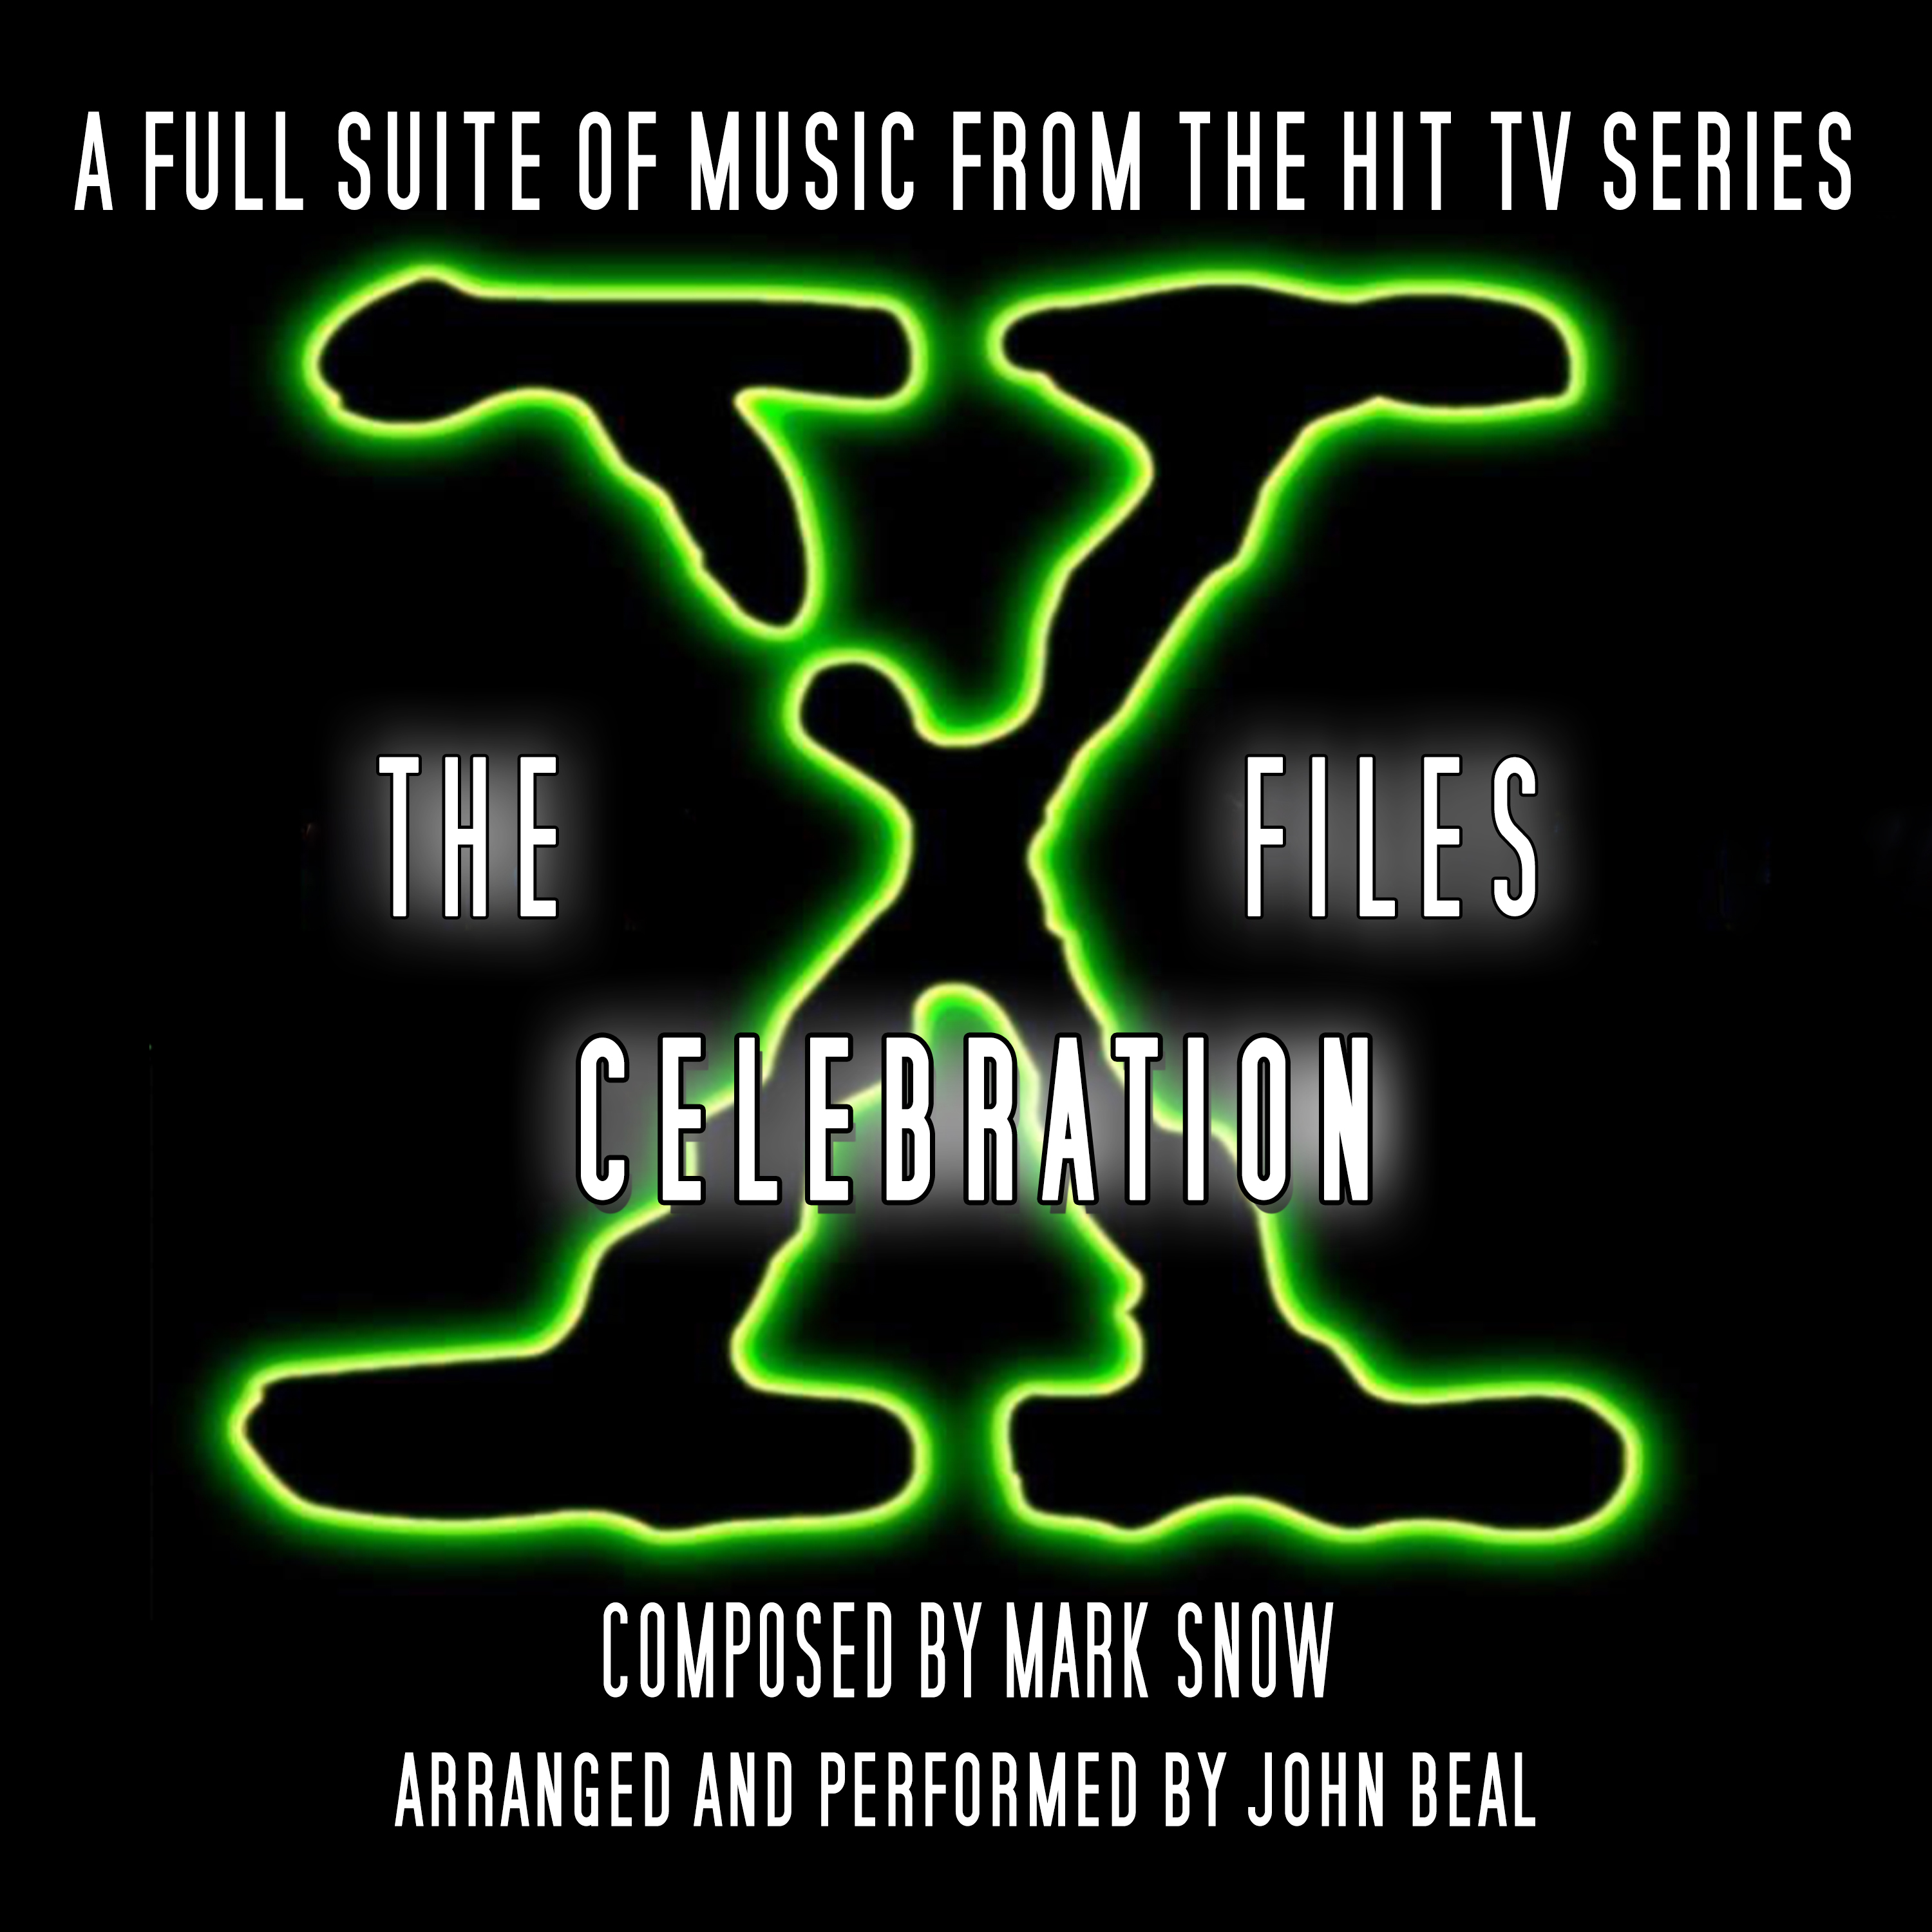 New X-Files Suite!